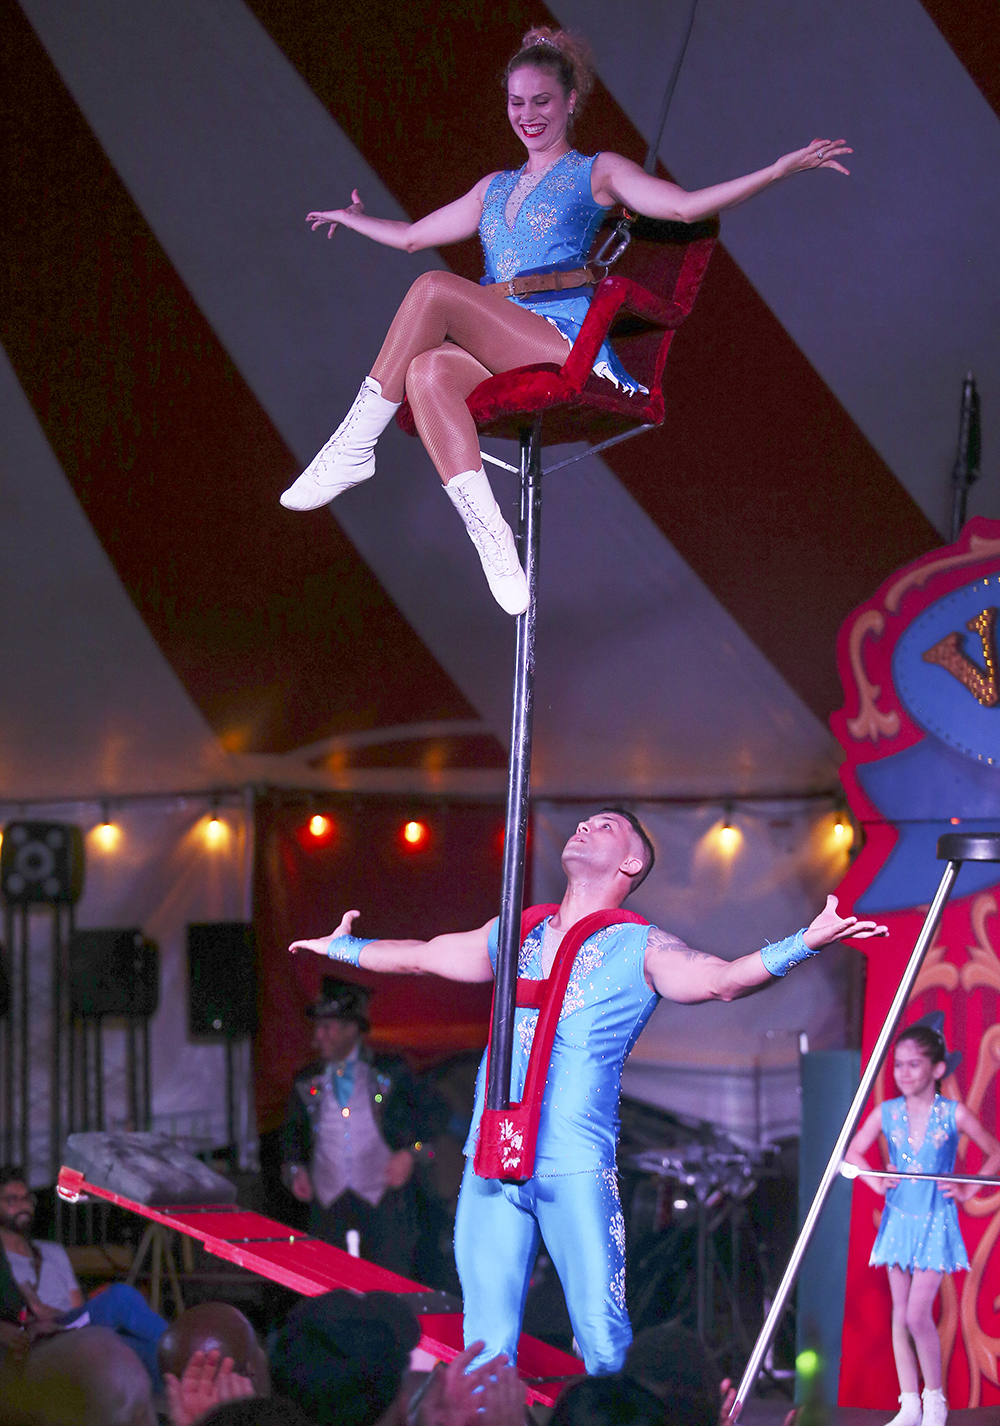 Leonard and Antoaneta Stoica perform an impressive springboard act for the show.